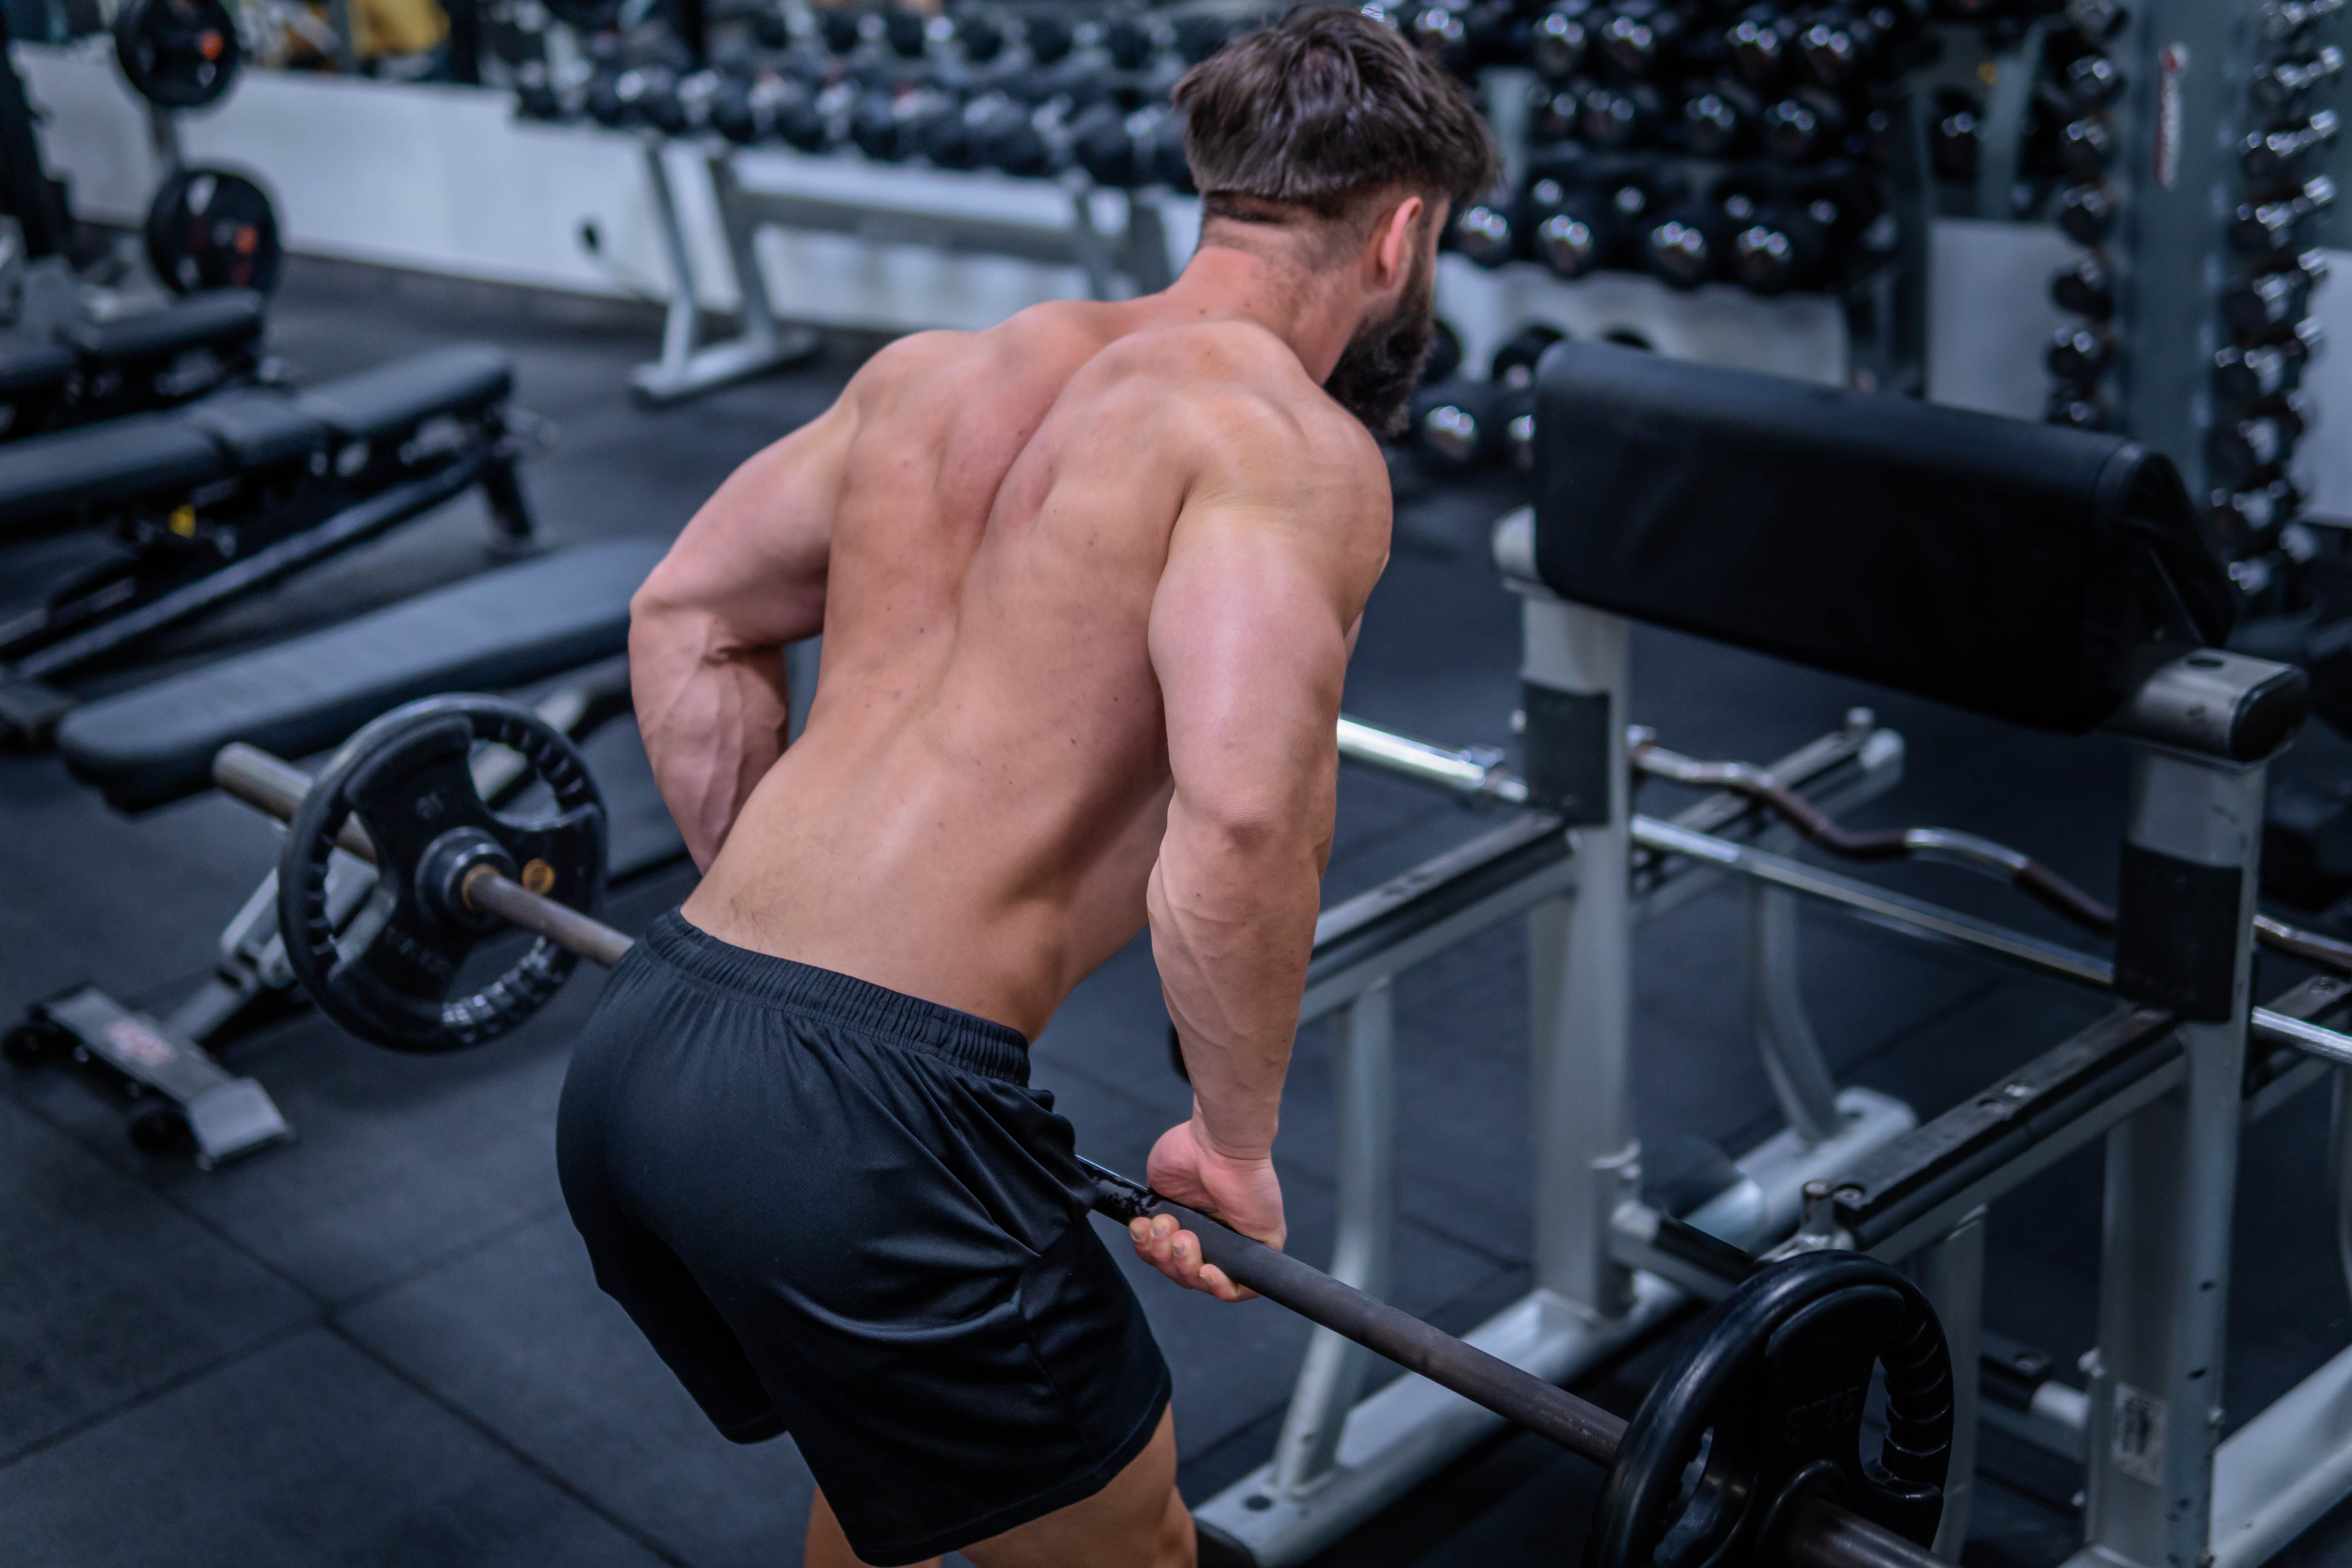 How to Master the Bent-Over Row